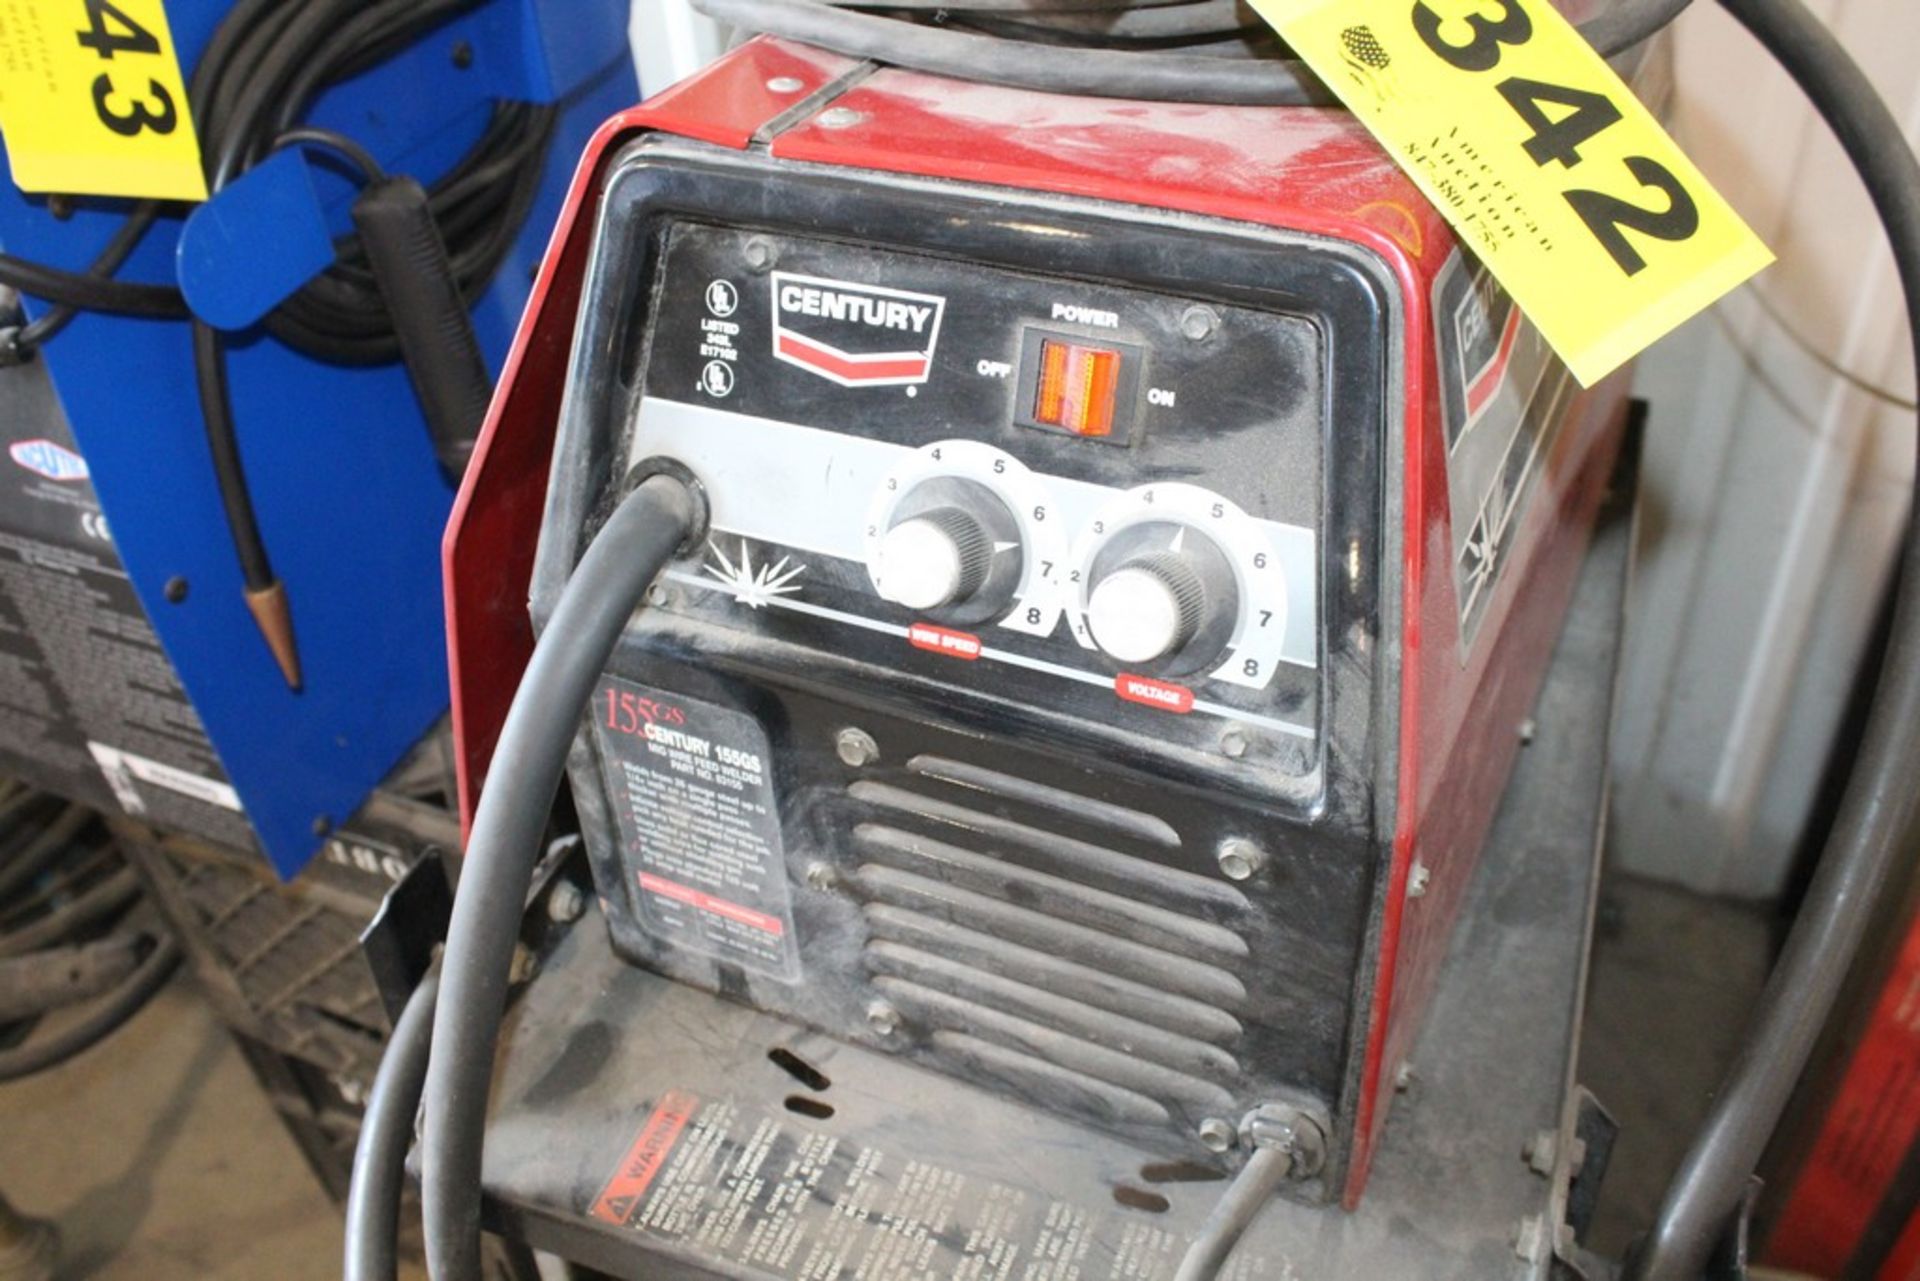 CENTURY MODEL 155GS PROFESSIONAL WIRE FEED WELDER WITH TAANK AND CART - Image 2 of 3